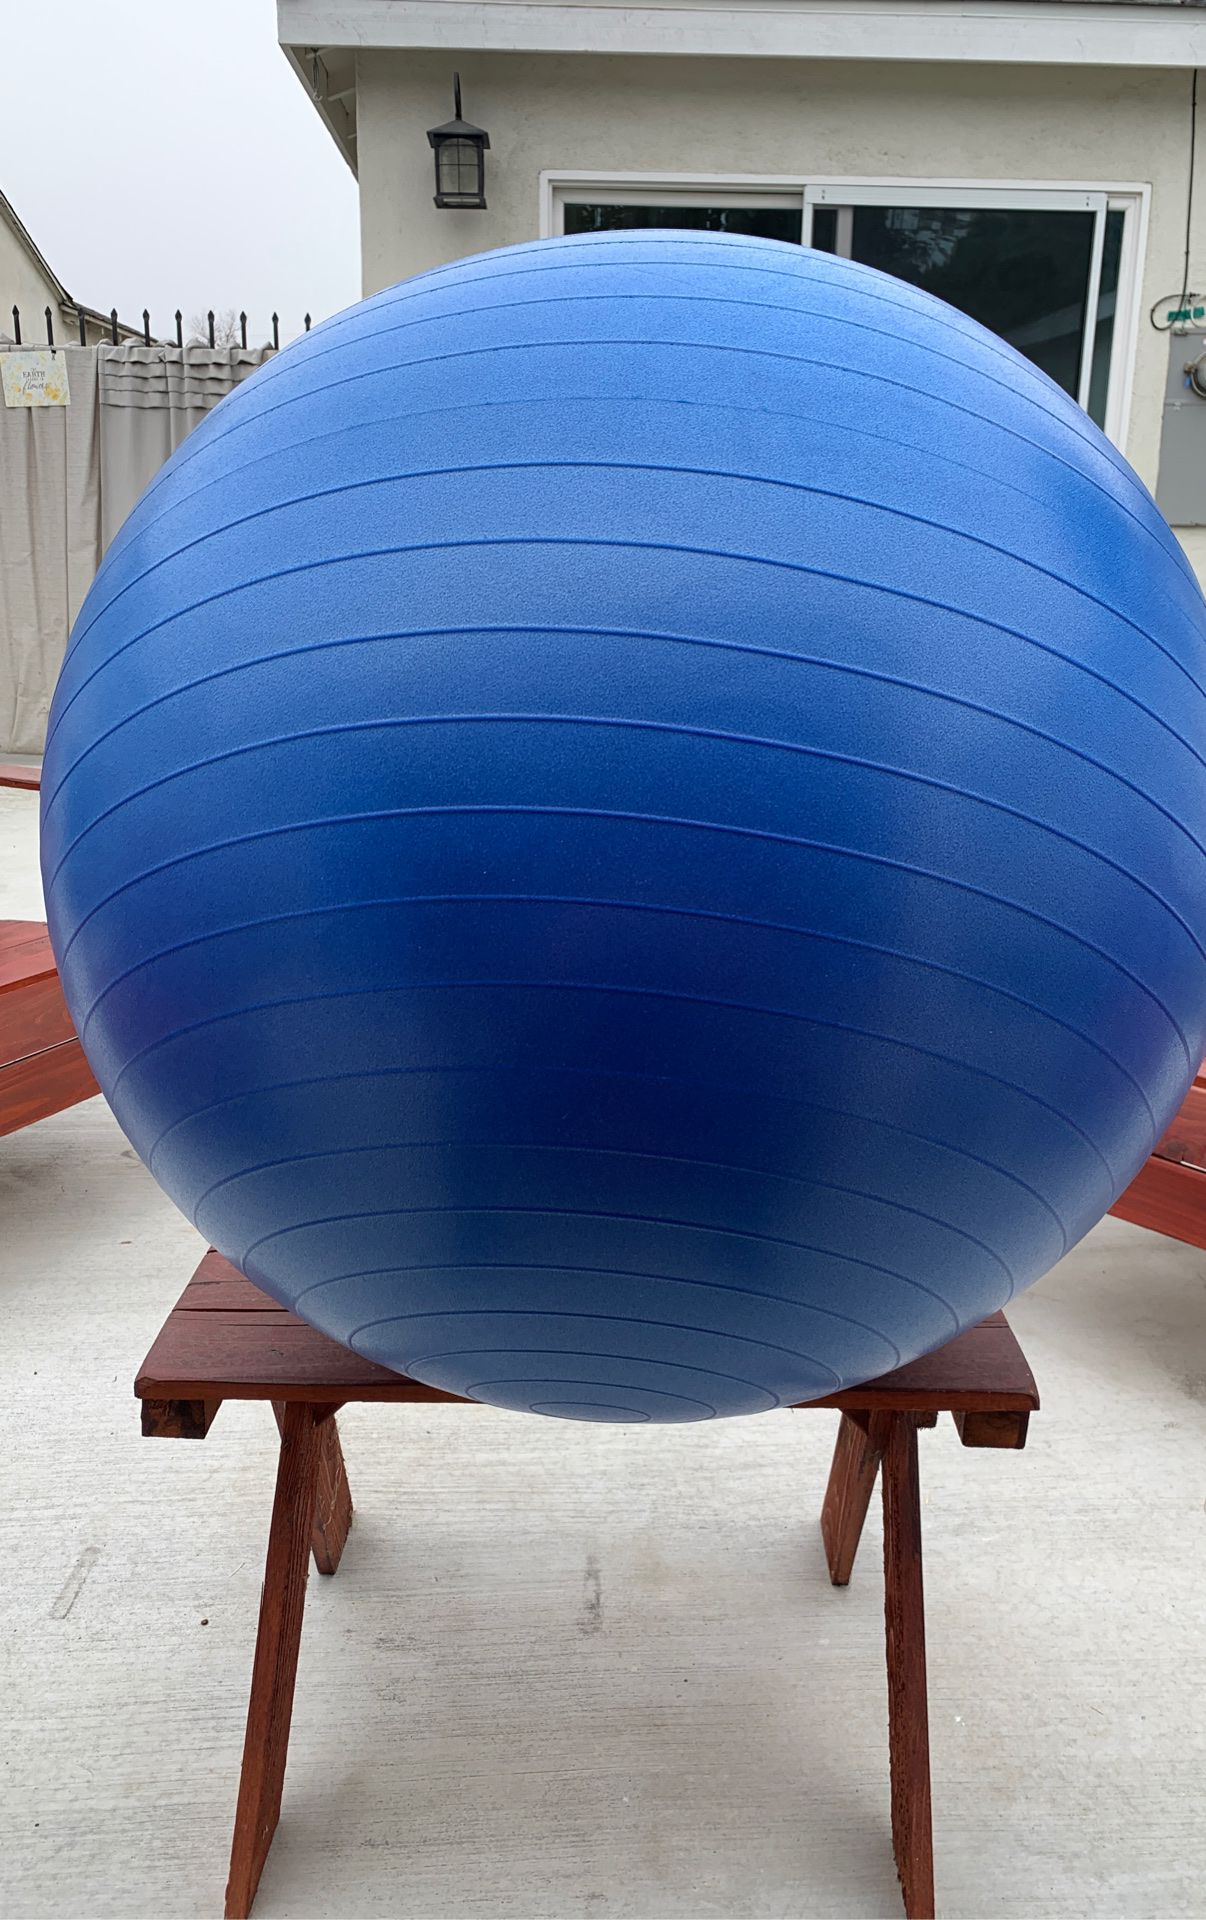 75cm Exercise Ball Chair for people 5’10” and above